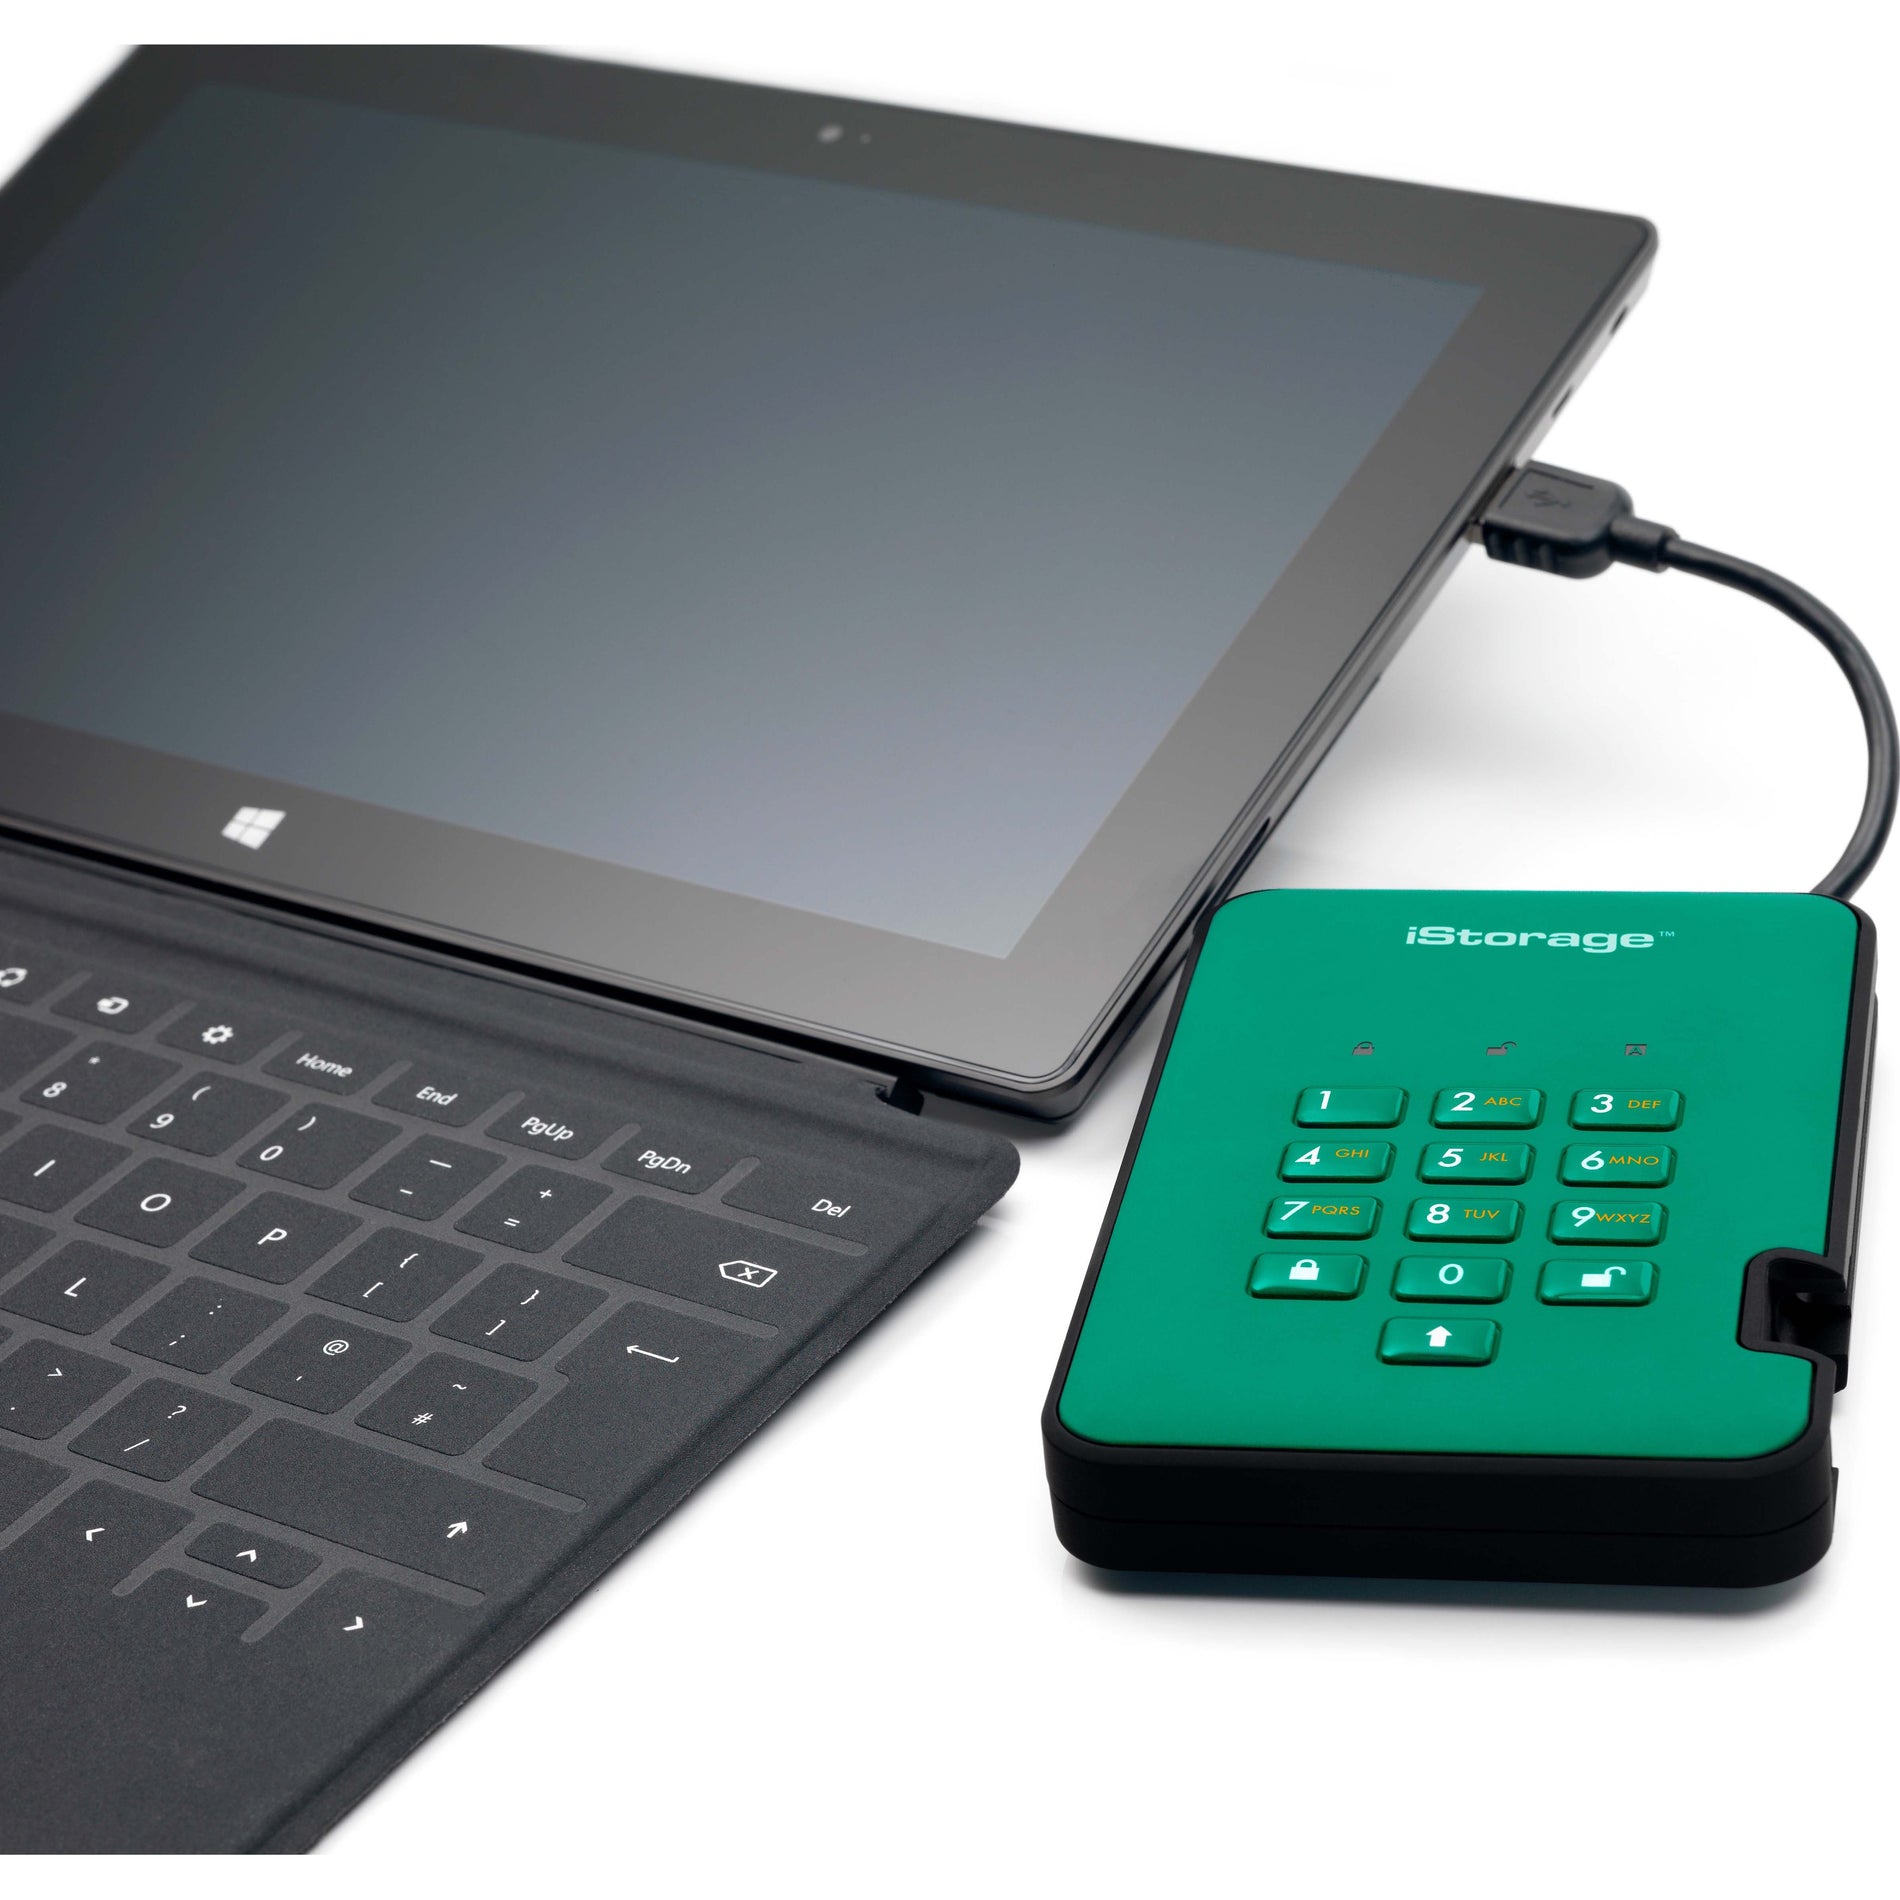 iStorage diskAshur2 16 TB Portable Rugged Solid State Drive - 2.5" External - Green - TAA Compliant (IS-DA2-256-SSD-16000-GN) Alternate-Image7 image